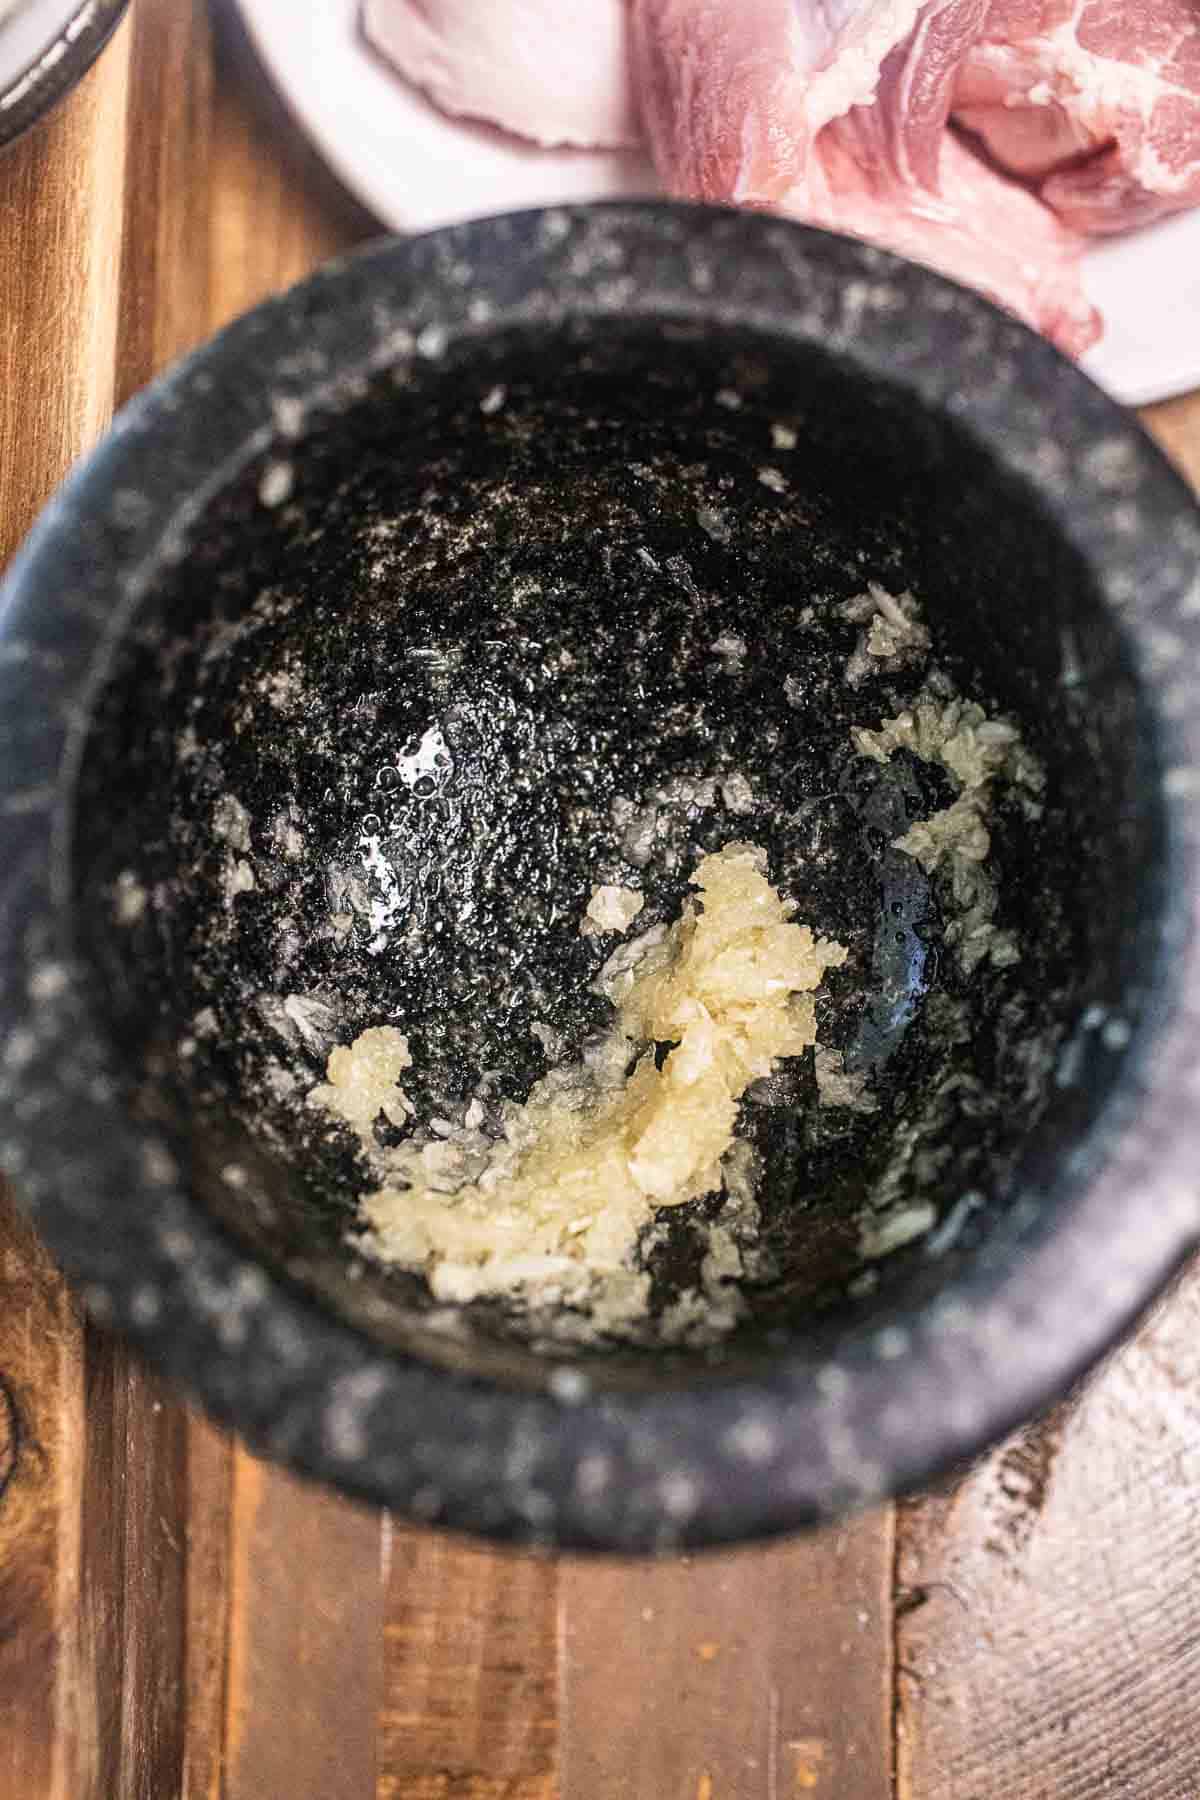 pounded garlic on mortar.